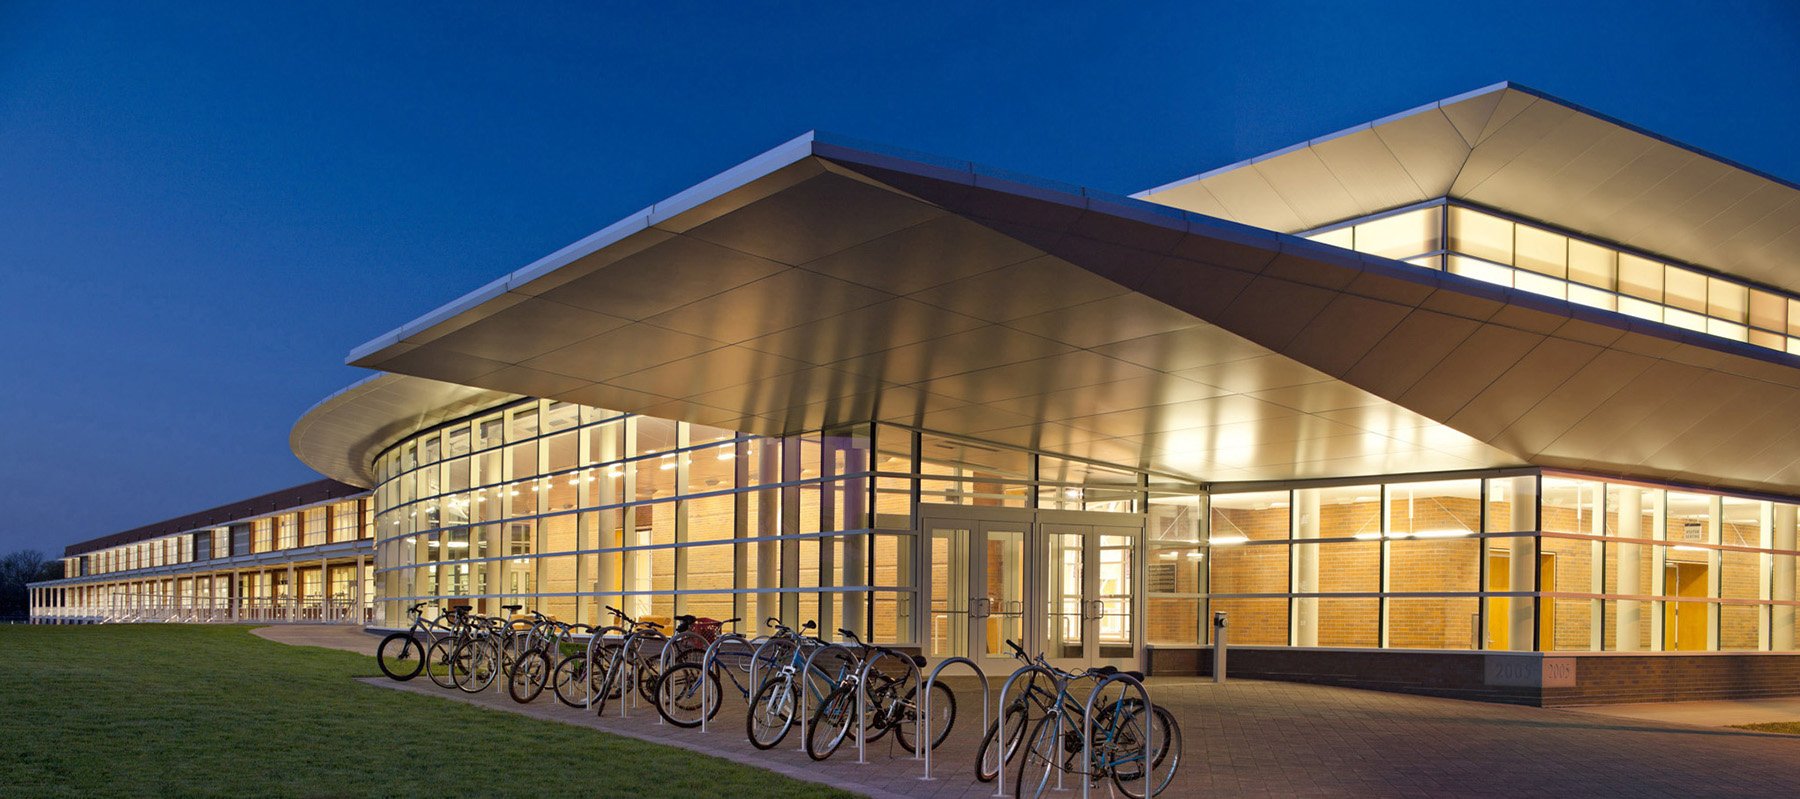 Grinnell College / Recreation & Athletic Center 